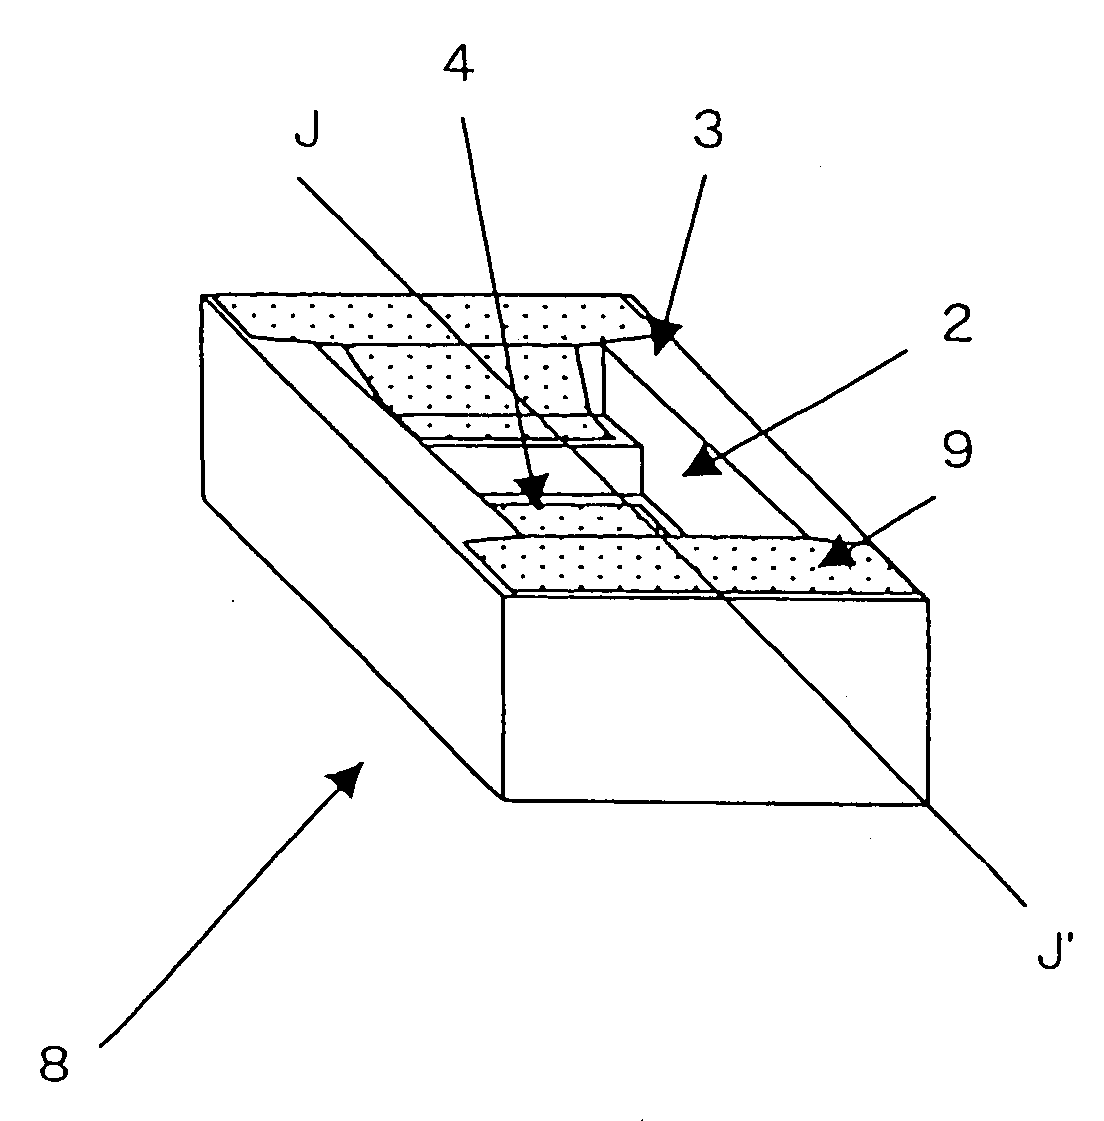 Ceramic package and chip resistor, and method for manufacture thereof